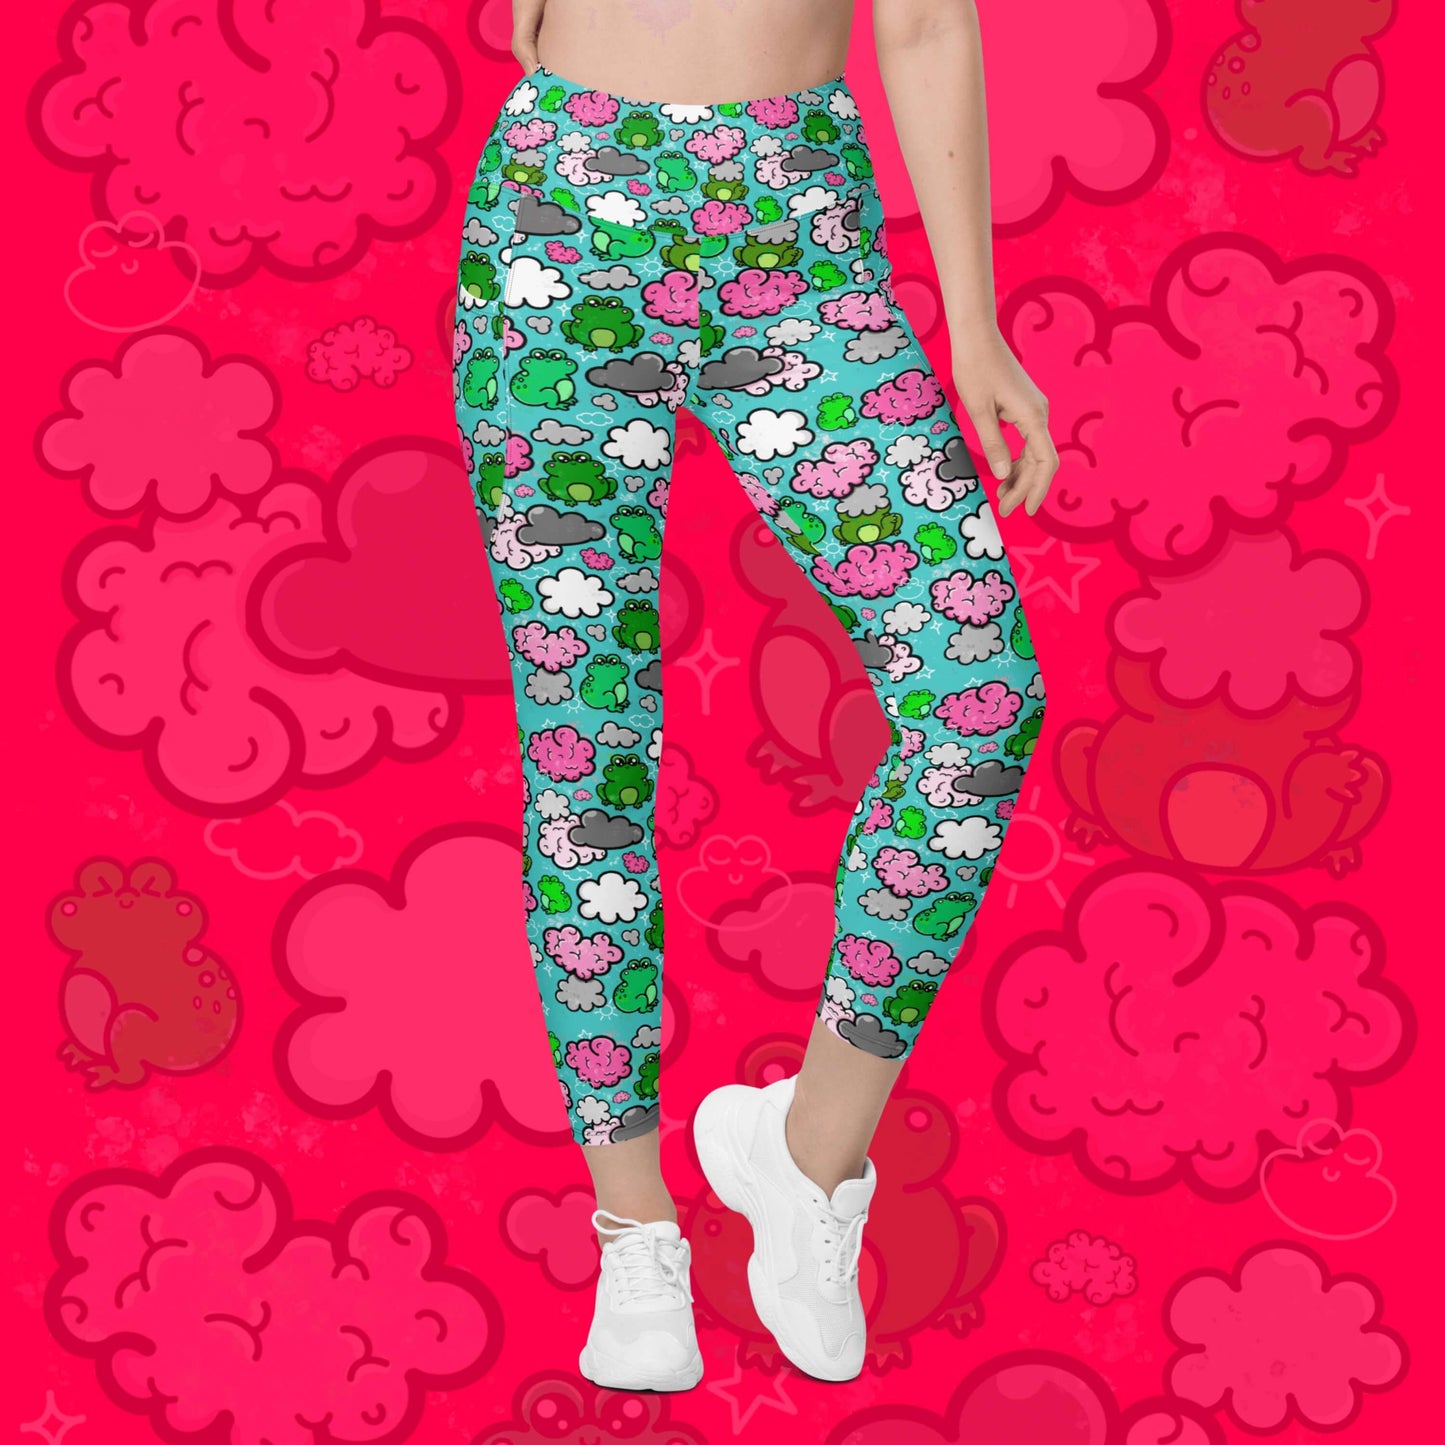 The Brain Frog Leggings with pockets - Brain Fog being worn by a model facing forward with their right leg bent on a red background with a faded brain frog print, the photo is cropped from the hips down. The leggings are an aqua blue base with various green kawaii face frogs with pink blush cheeks, pink brain style clouds, white and grey clouds and white sparkles all over. The design was created to raise awareness of Brain Fog.